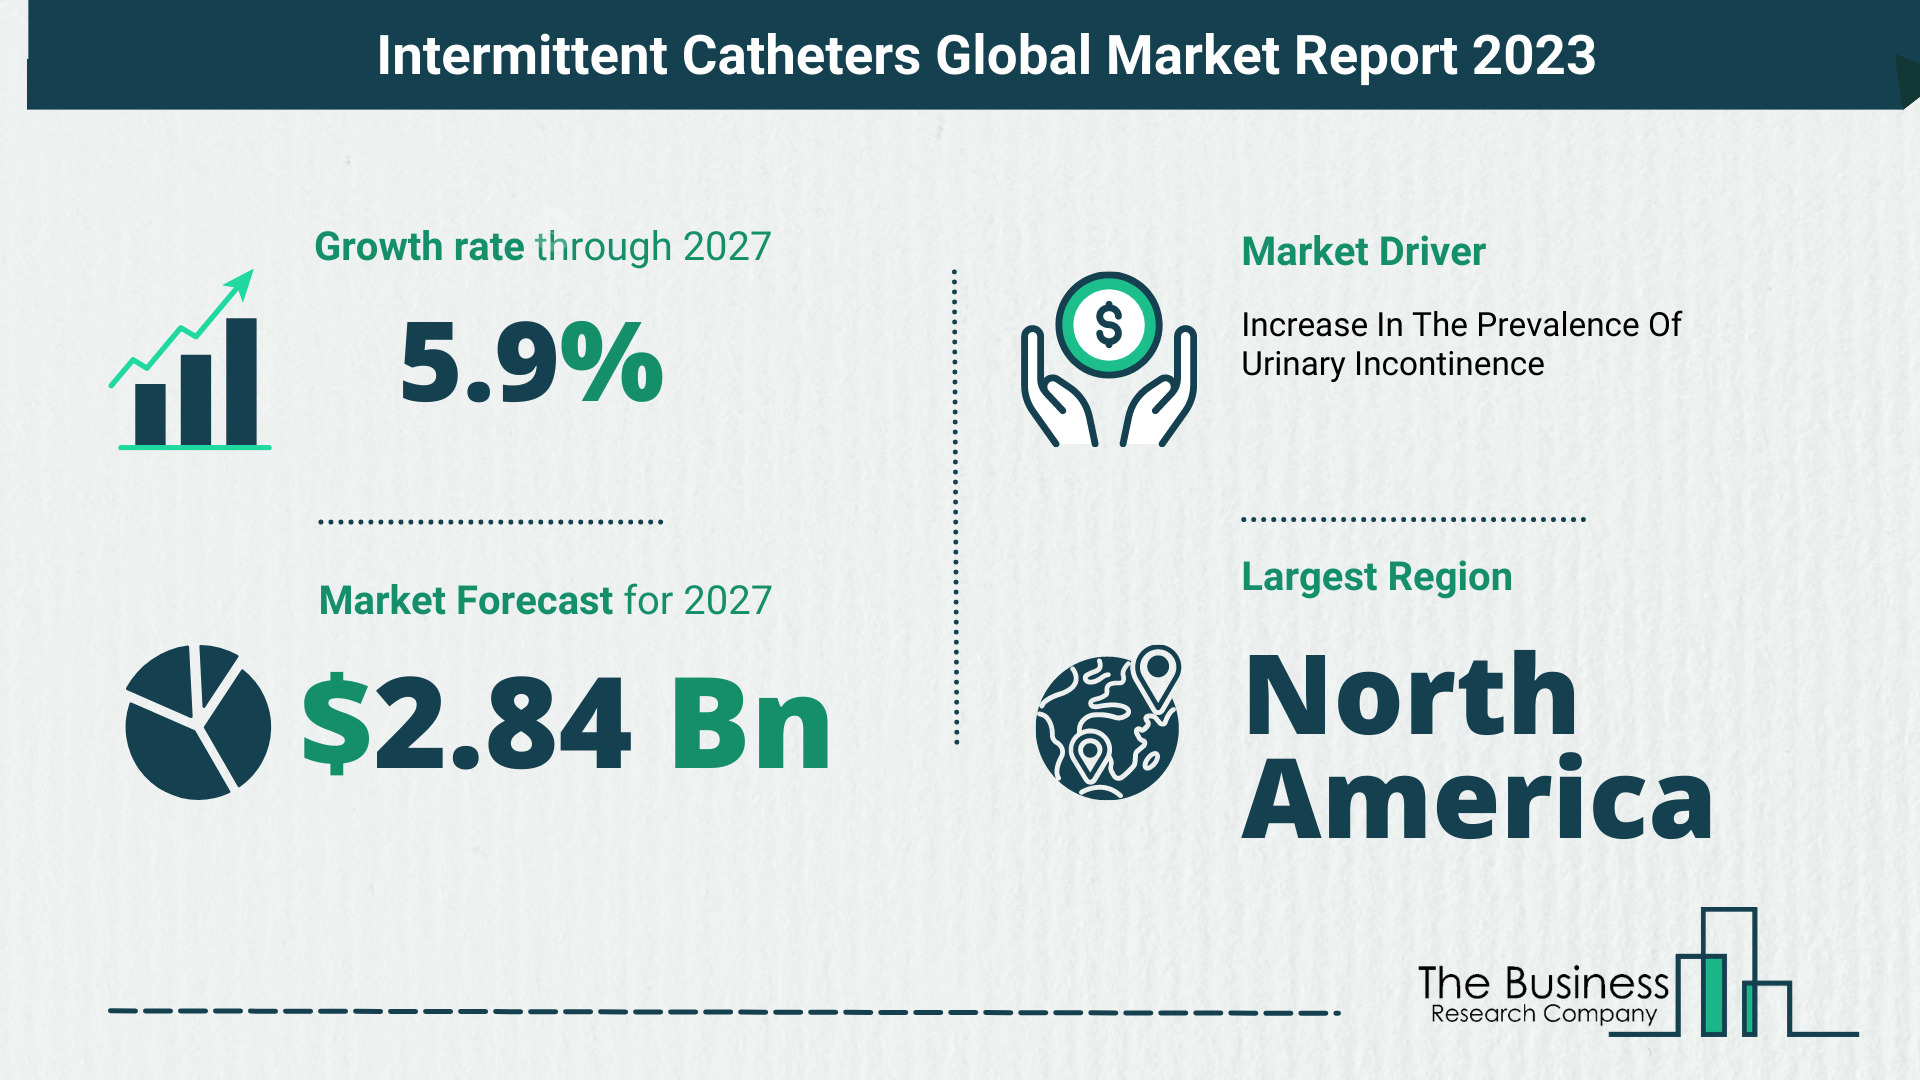 Global Intermittent Catheters Market Opportunities And Strategies 2023